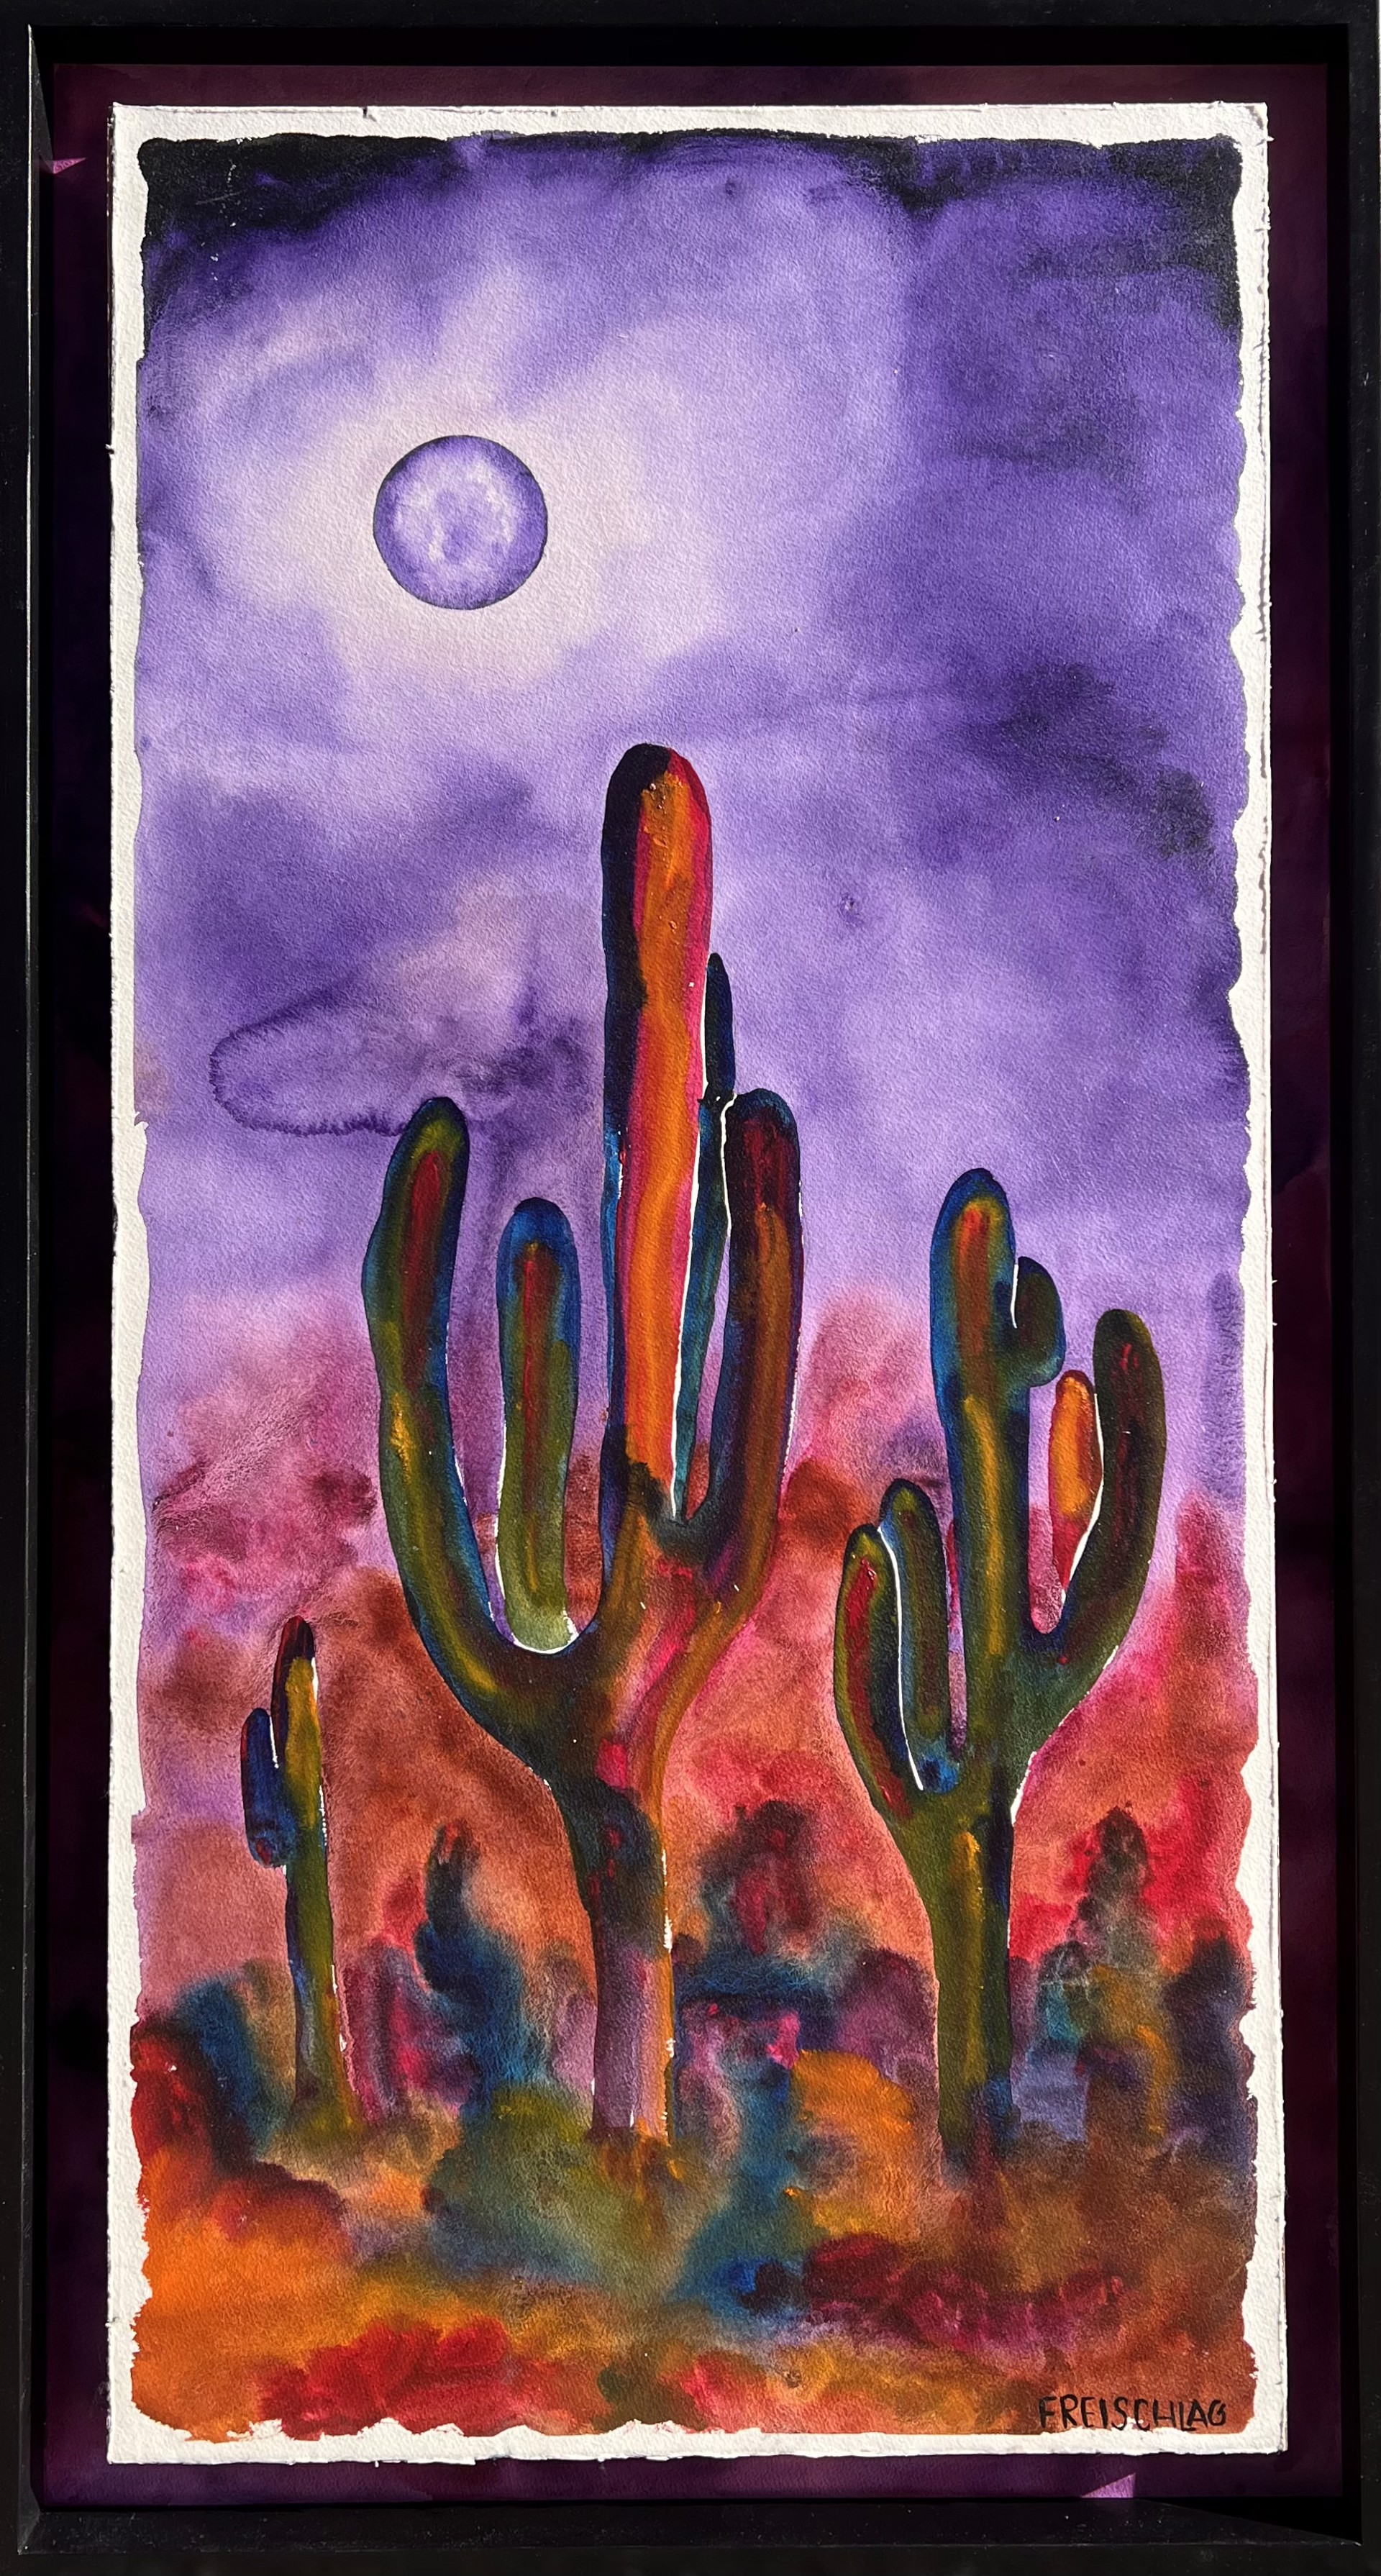 Cactus of a Purple Moon by Peter Freischlag